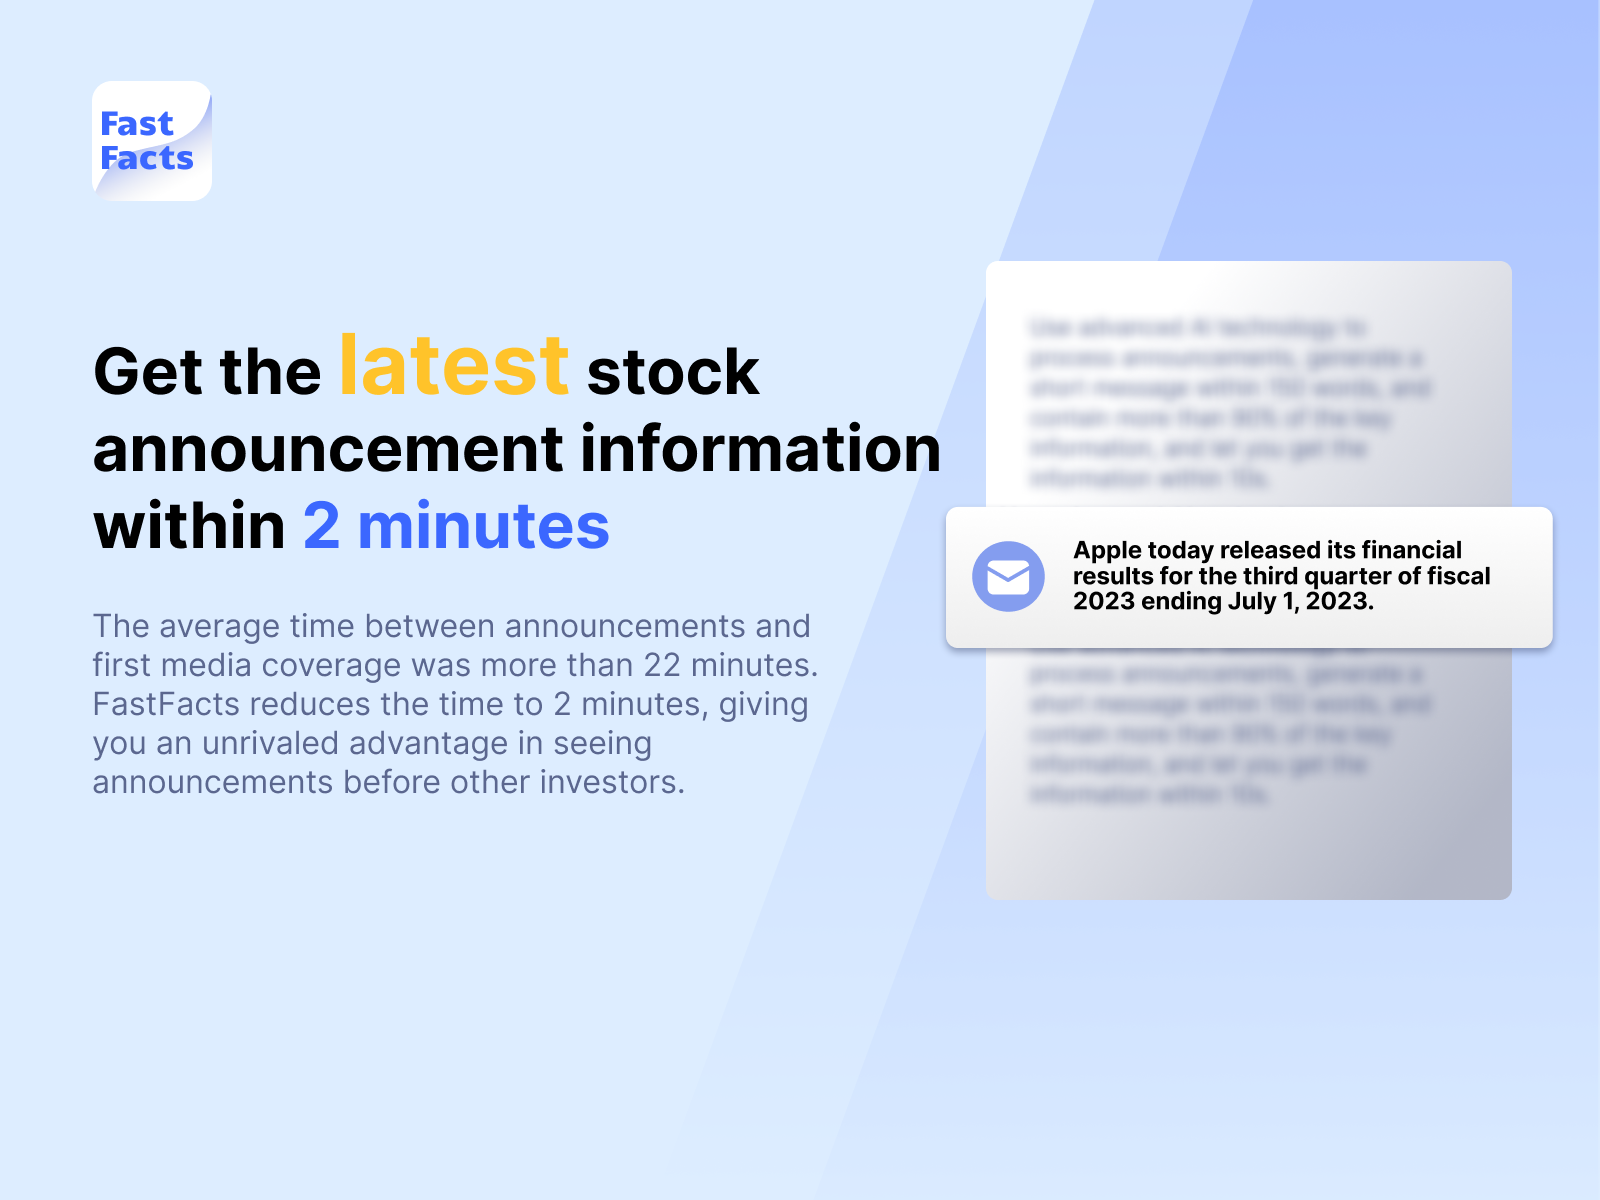 startuptile FastFacts-Get the latest listing announcement within 2min